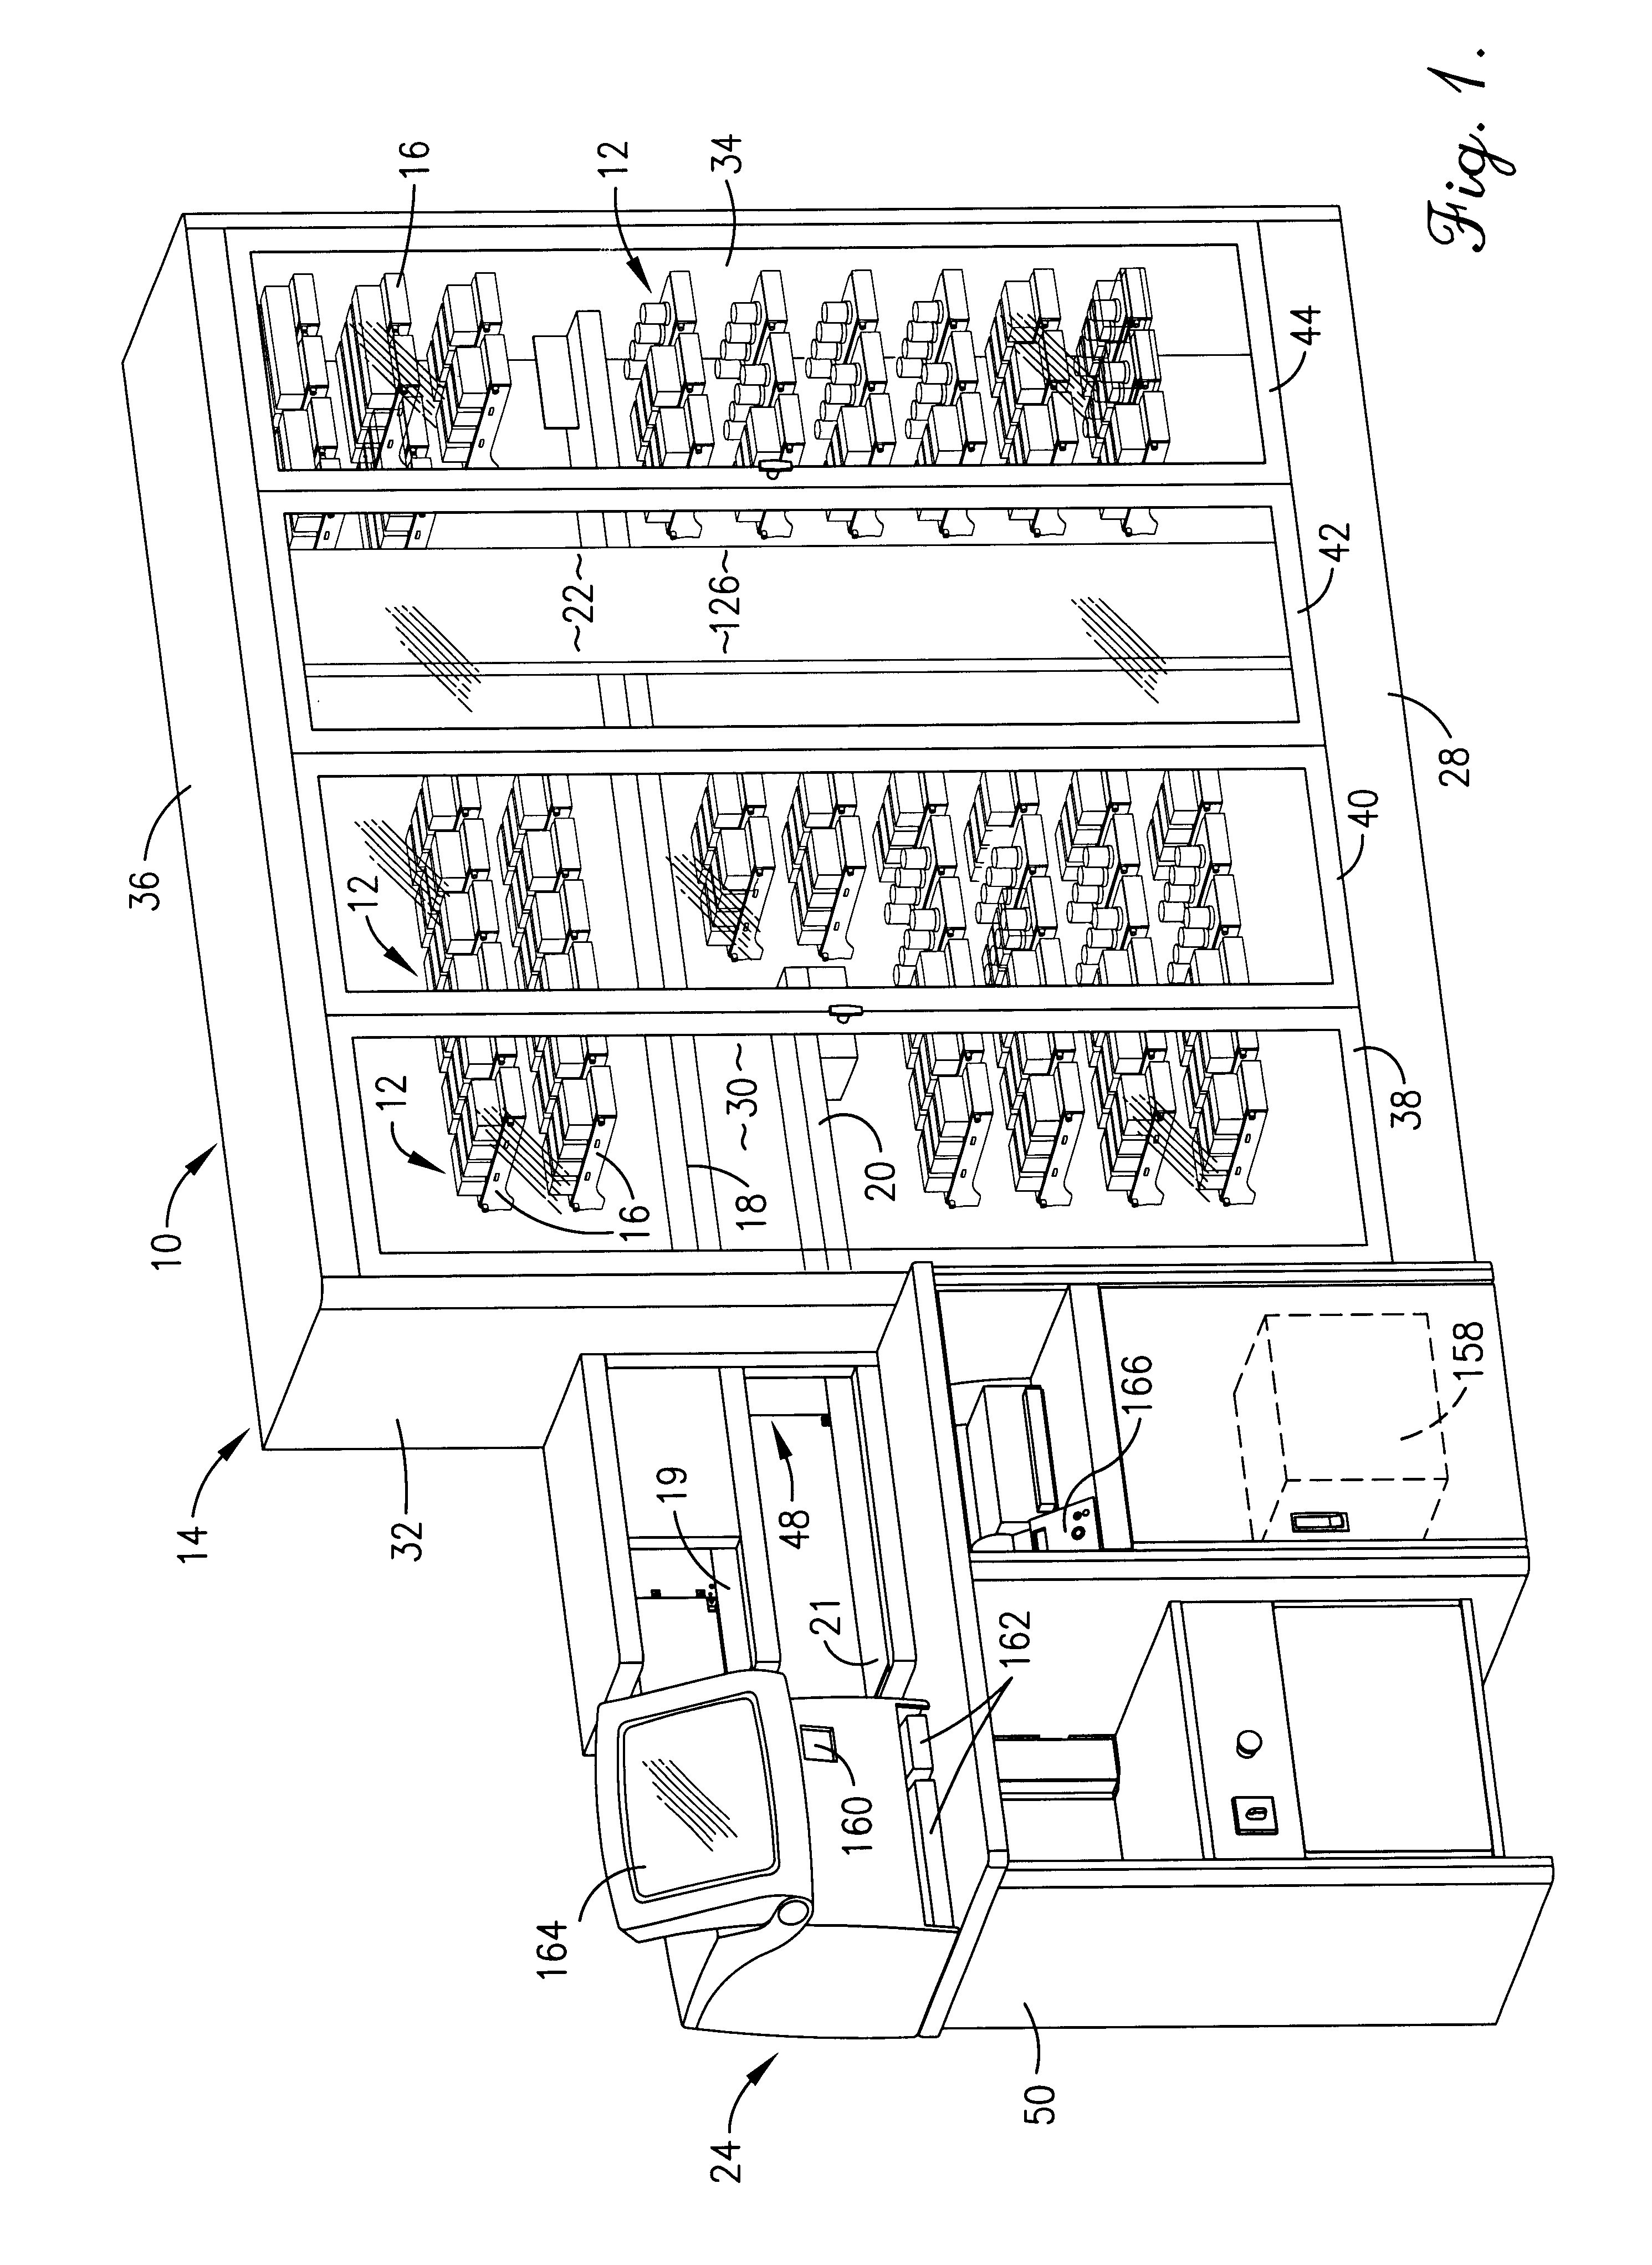 Automatic dispensing system for unit medicament packages